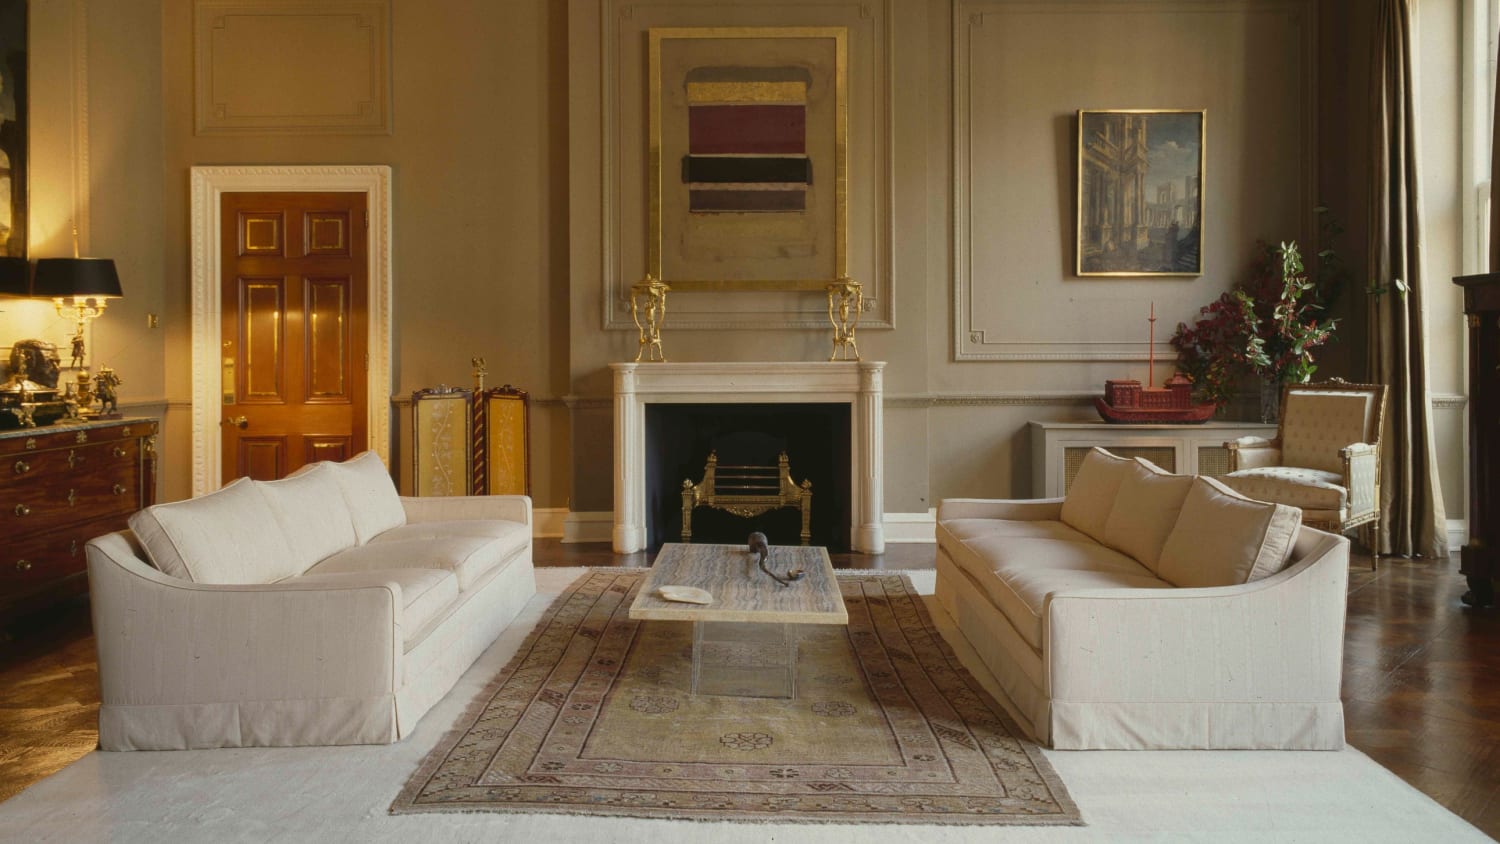 From the archive: the late collector Marcella Rossi's timeless London flat (1985)